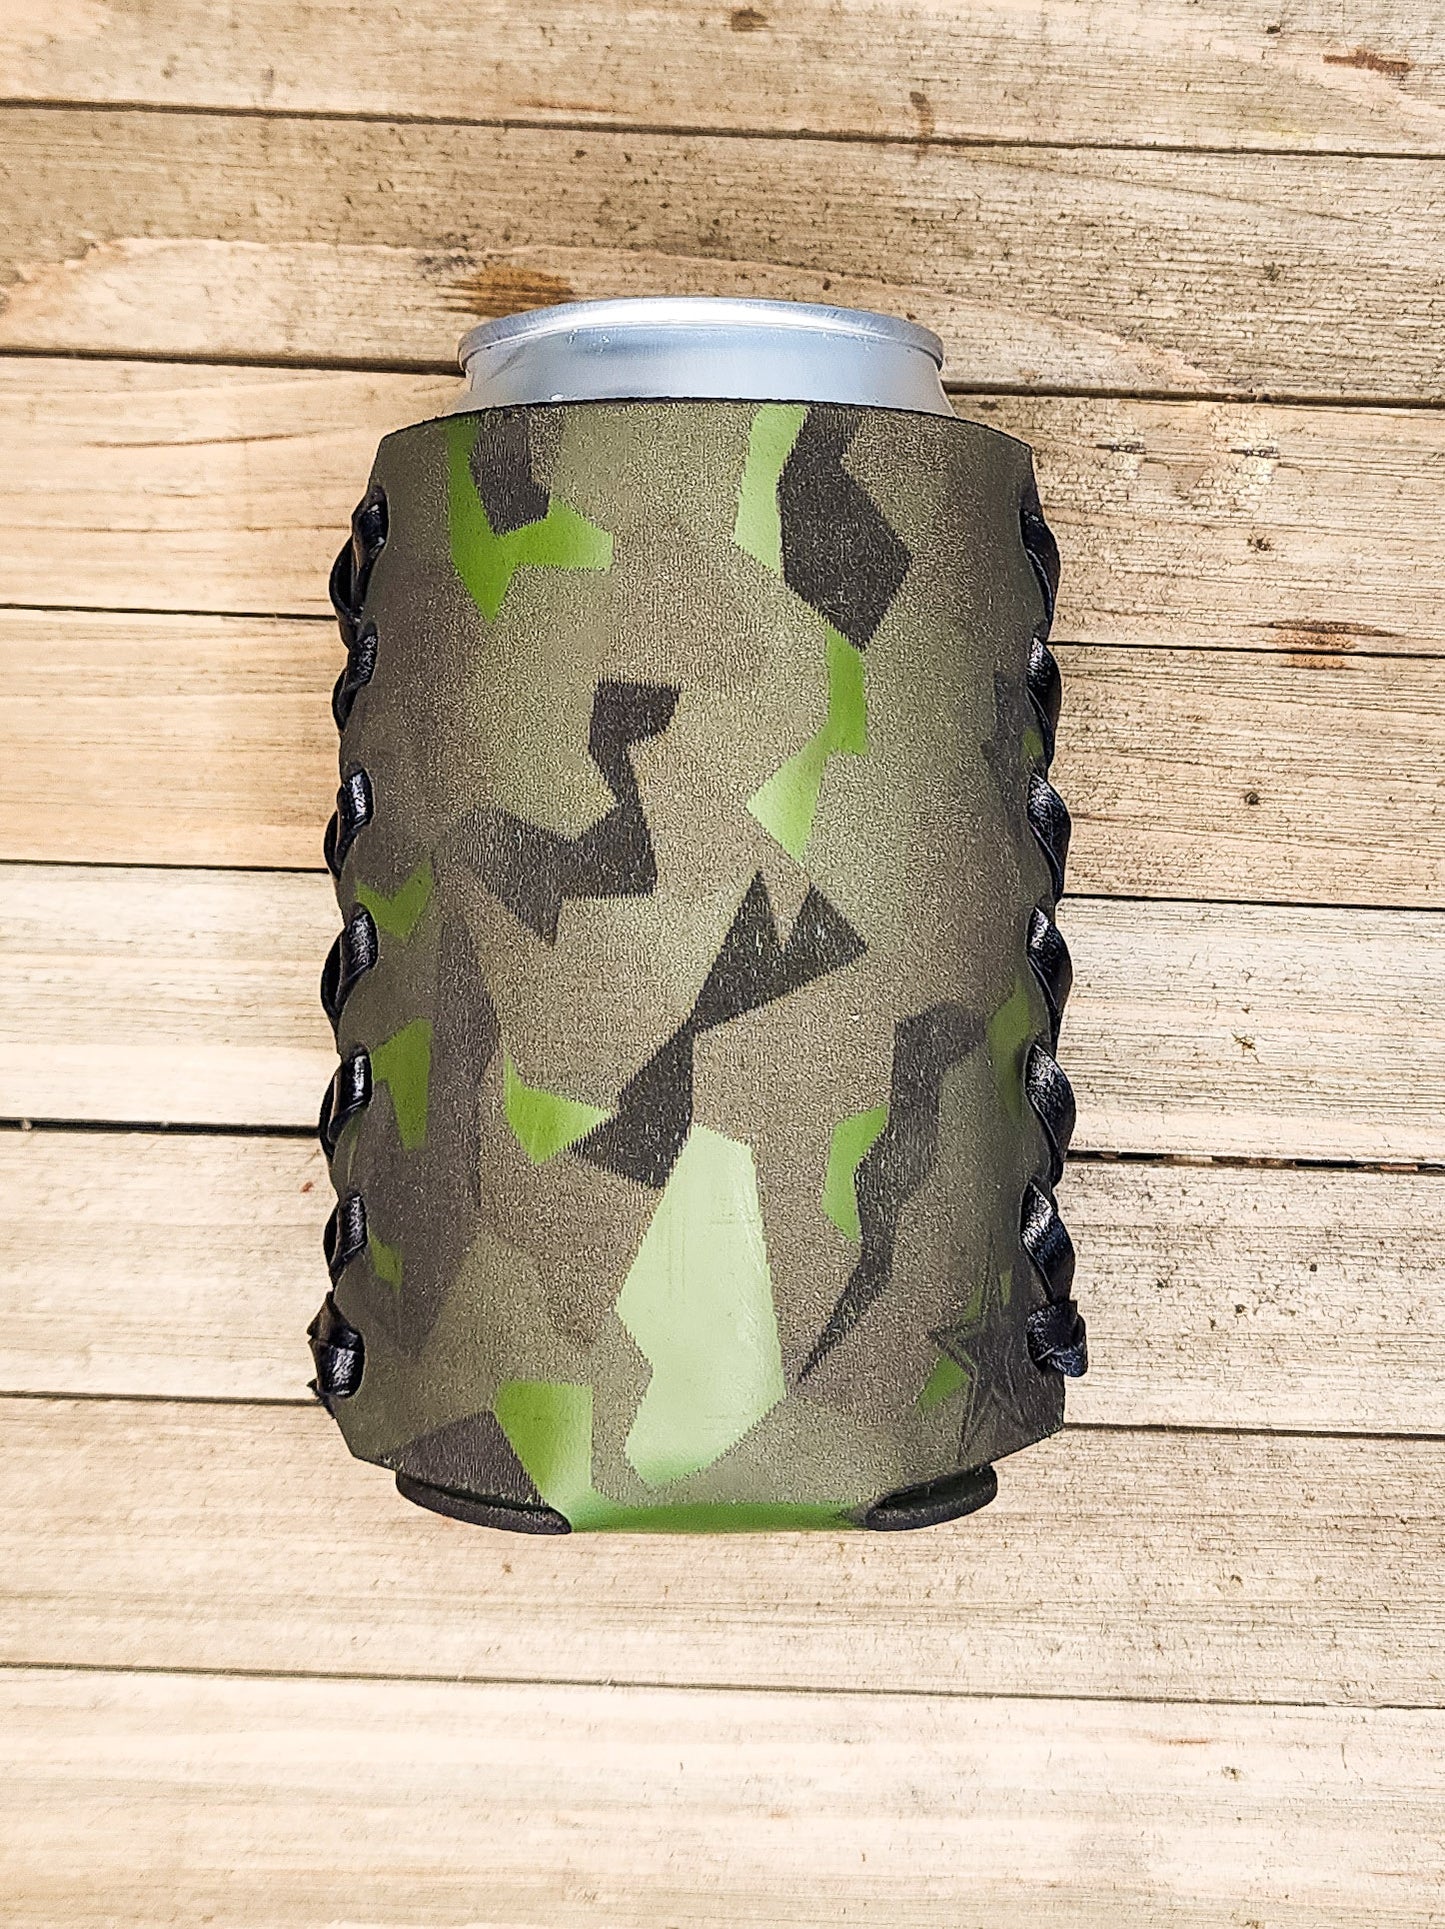 Digital camo green leather personalized koozie engraved with camo print unique gift for cowboys fans